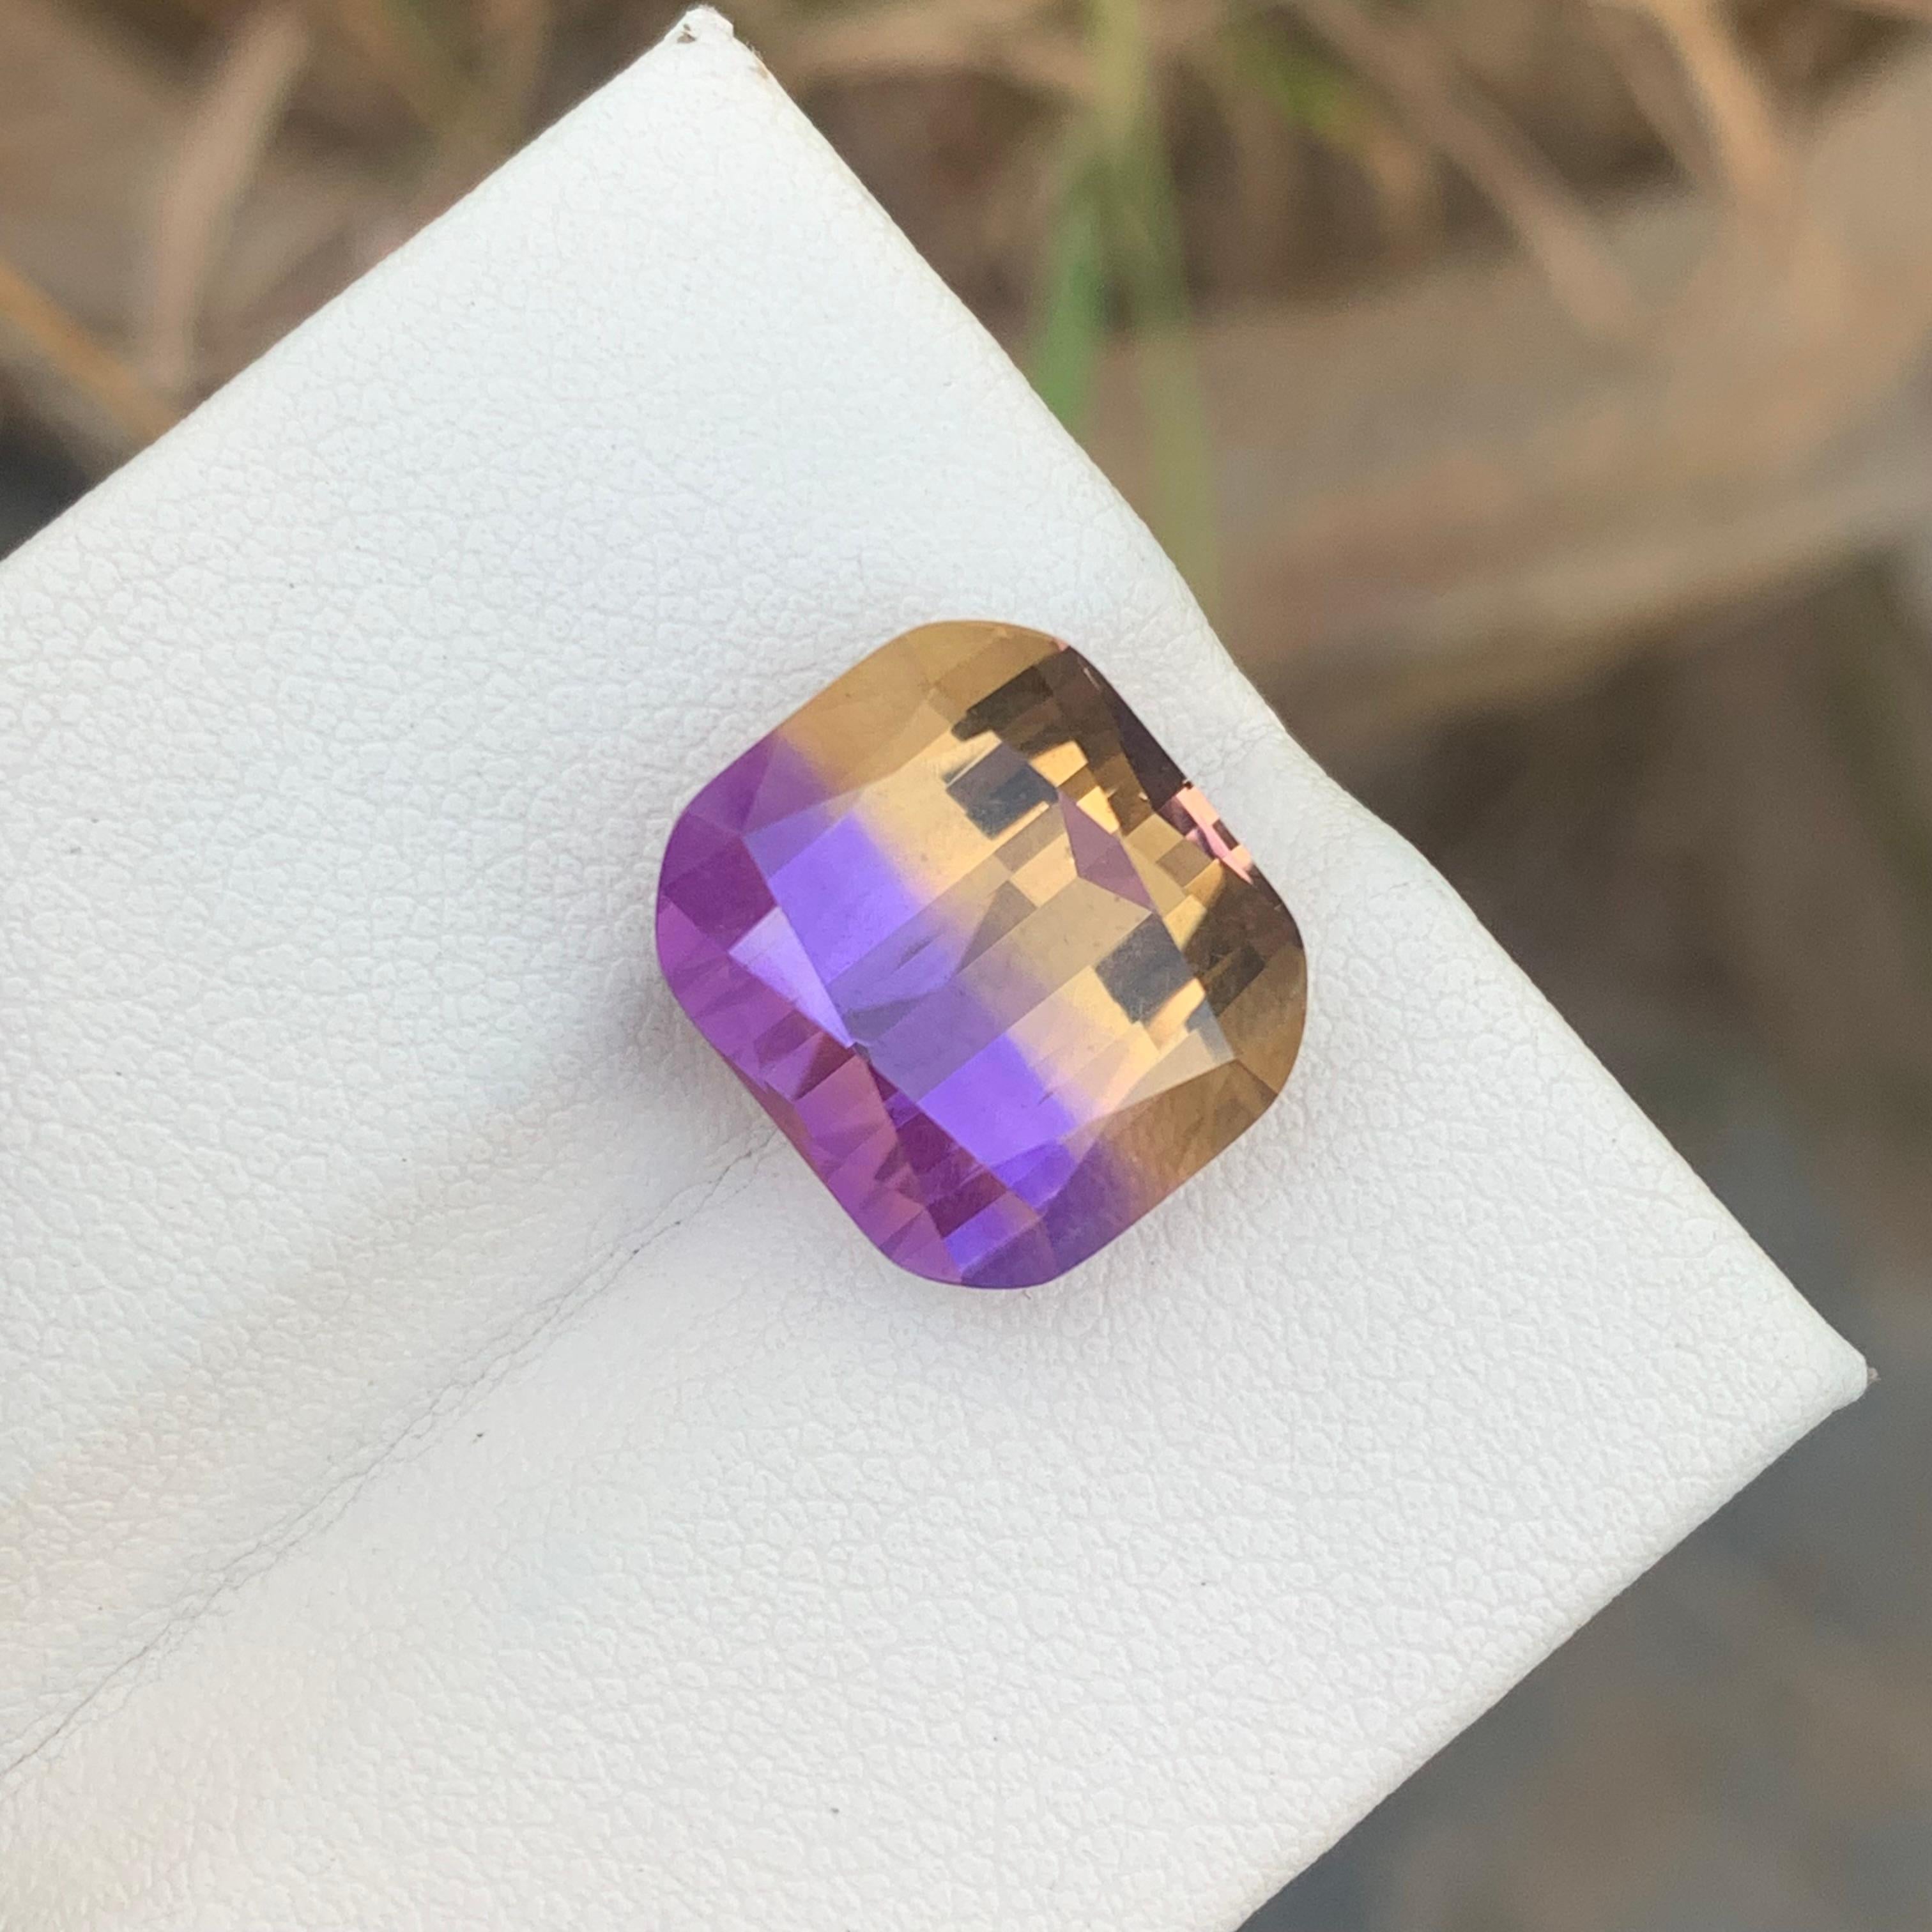 Loose Ametrine 
Weight: 10.30 Carats 
Dimension: 11.9x13.5x9.2 Mm
Origin: Bolivia 
Shape: Oval Cushion
Color: Purple & Yellow
Treatment: Non
Certificate: On Client Demand 
Ametrine is a captivating gemstone that seamlessly blends two distinct